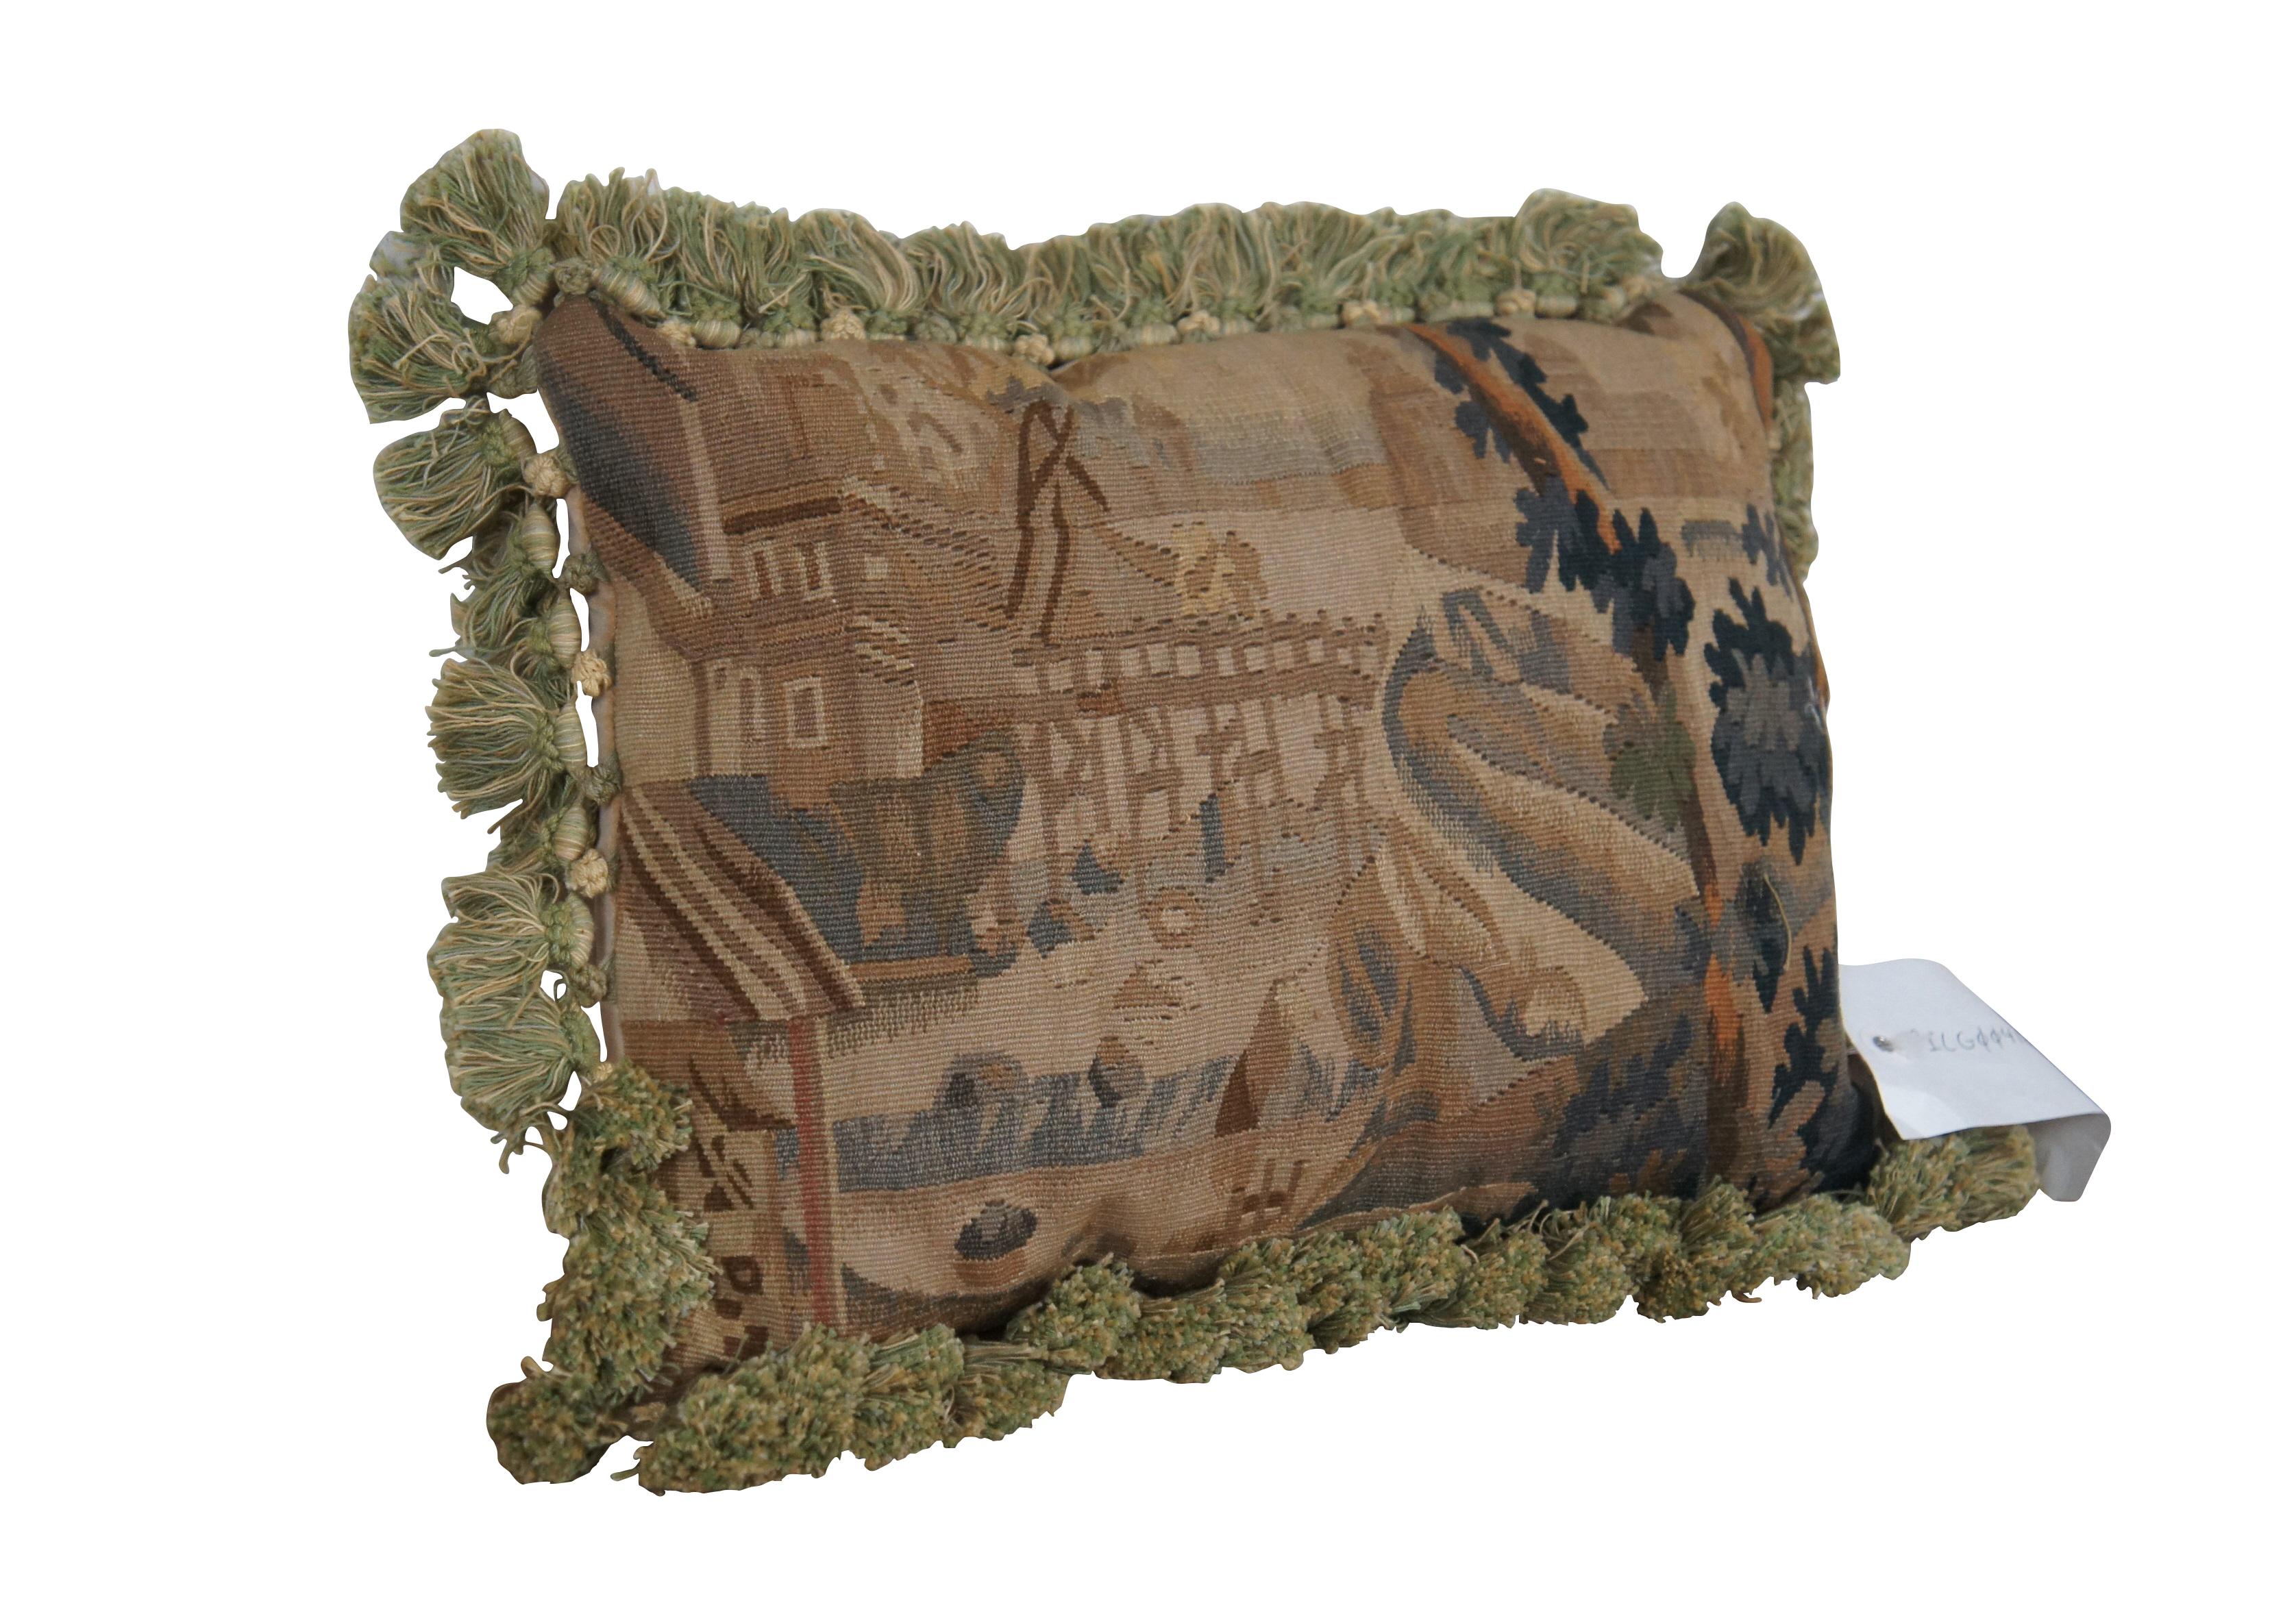 20th century French Aubusson style rectangular lumbar / throw pillow, embroidered in wool showing a cityscape along a river, framed with rocks and trees. Cream and green tassel trim. Light brown velour back with zipper closure. Down